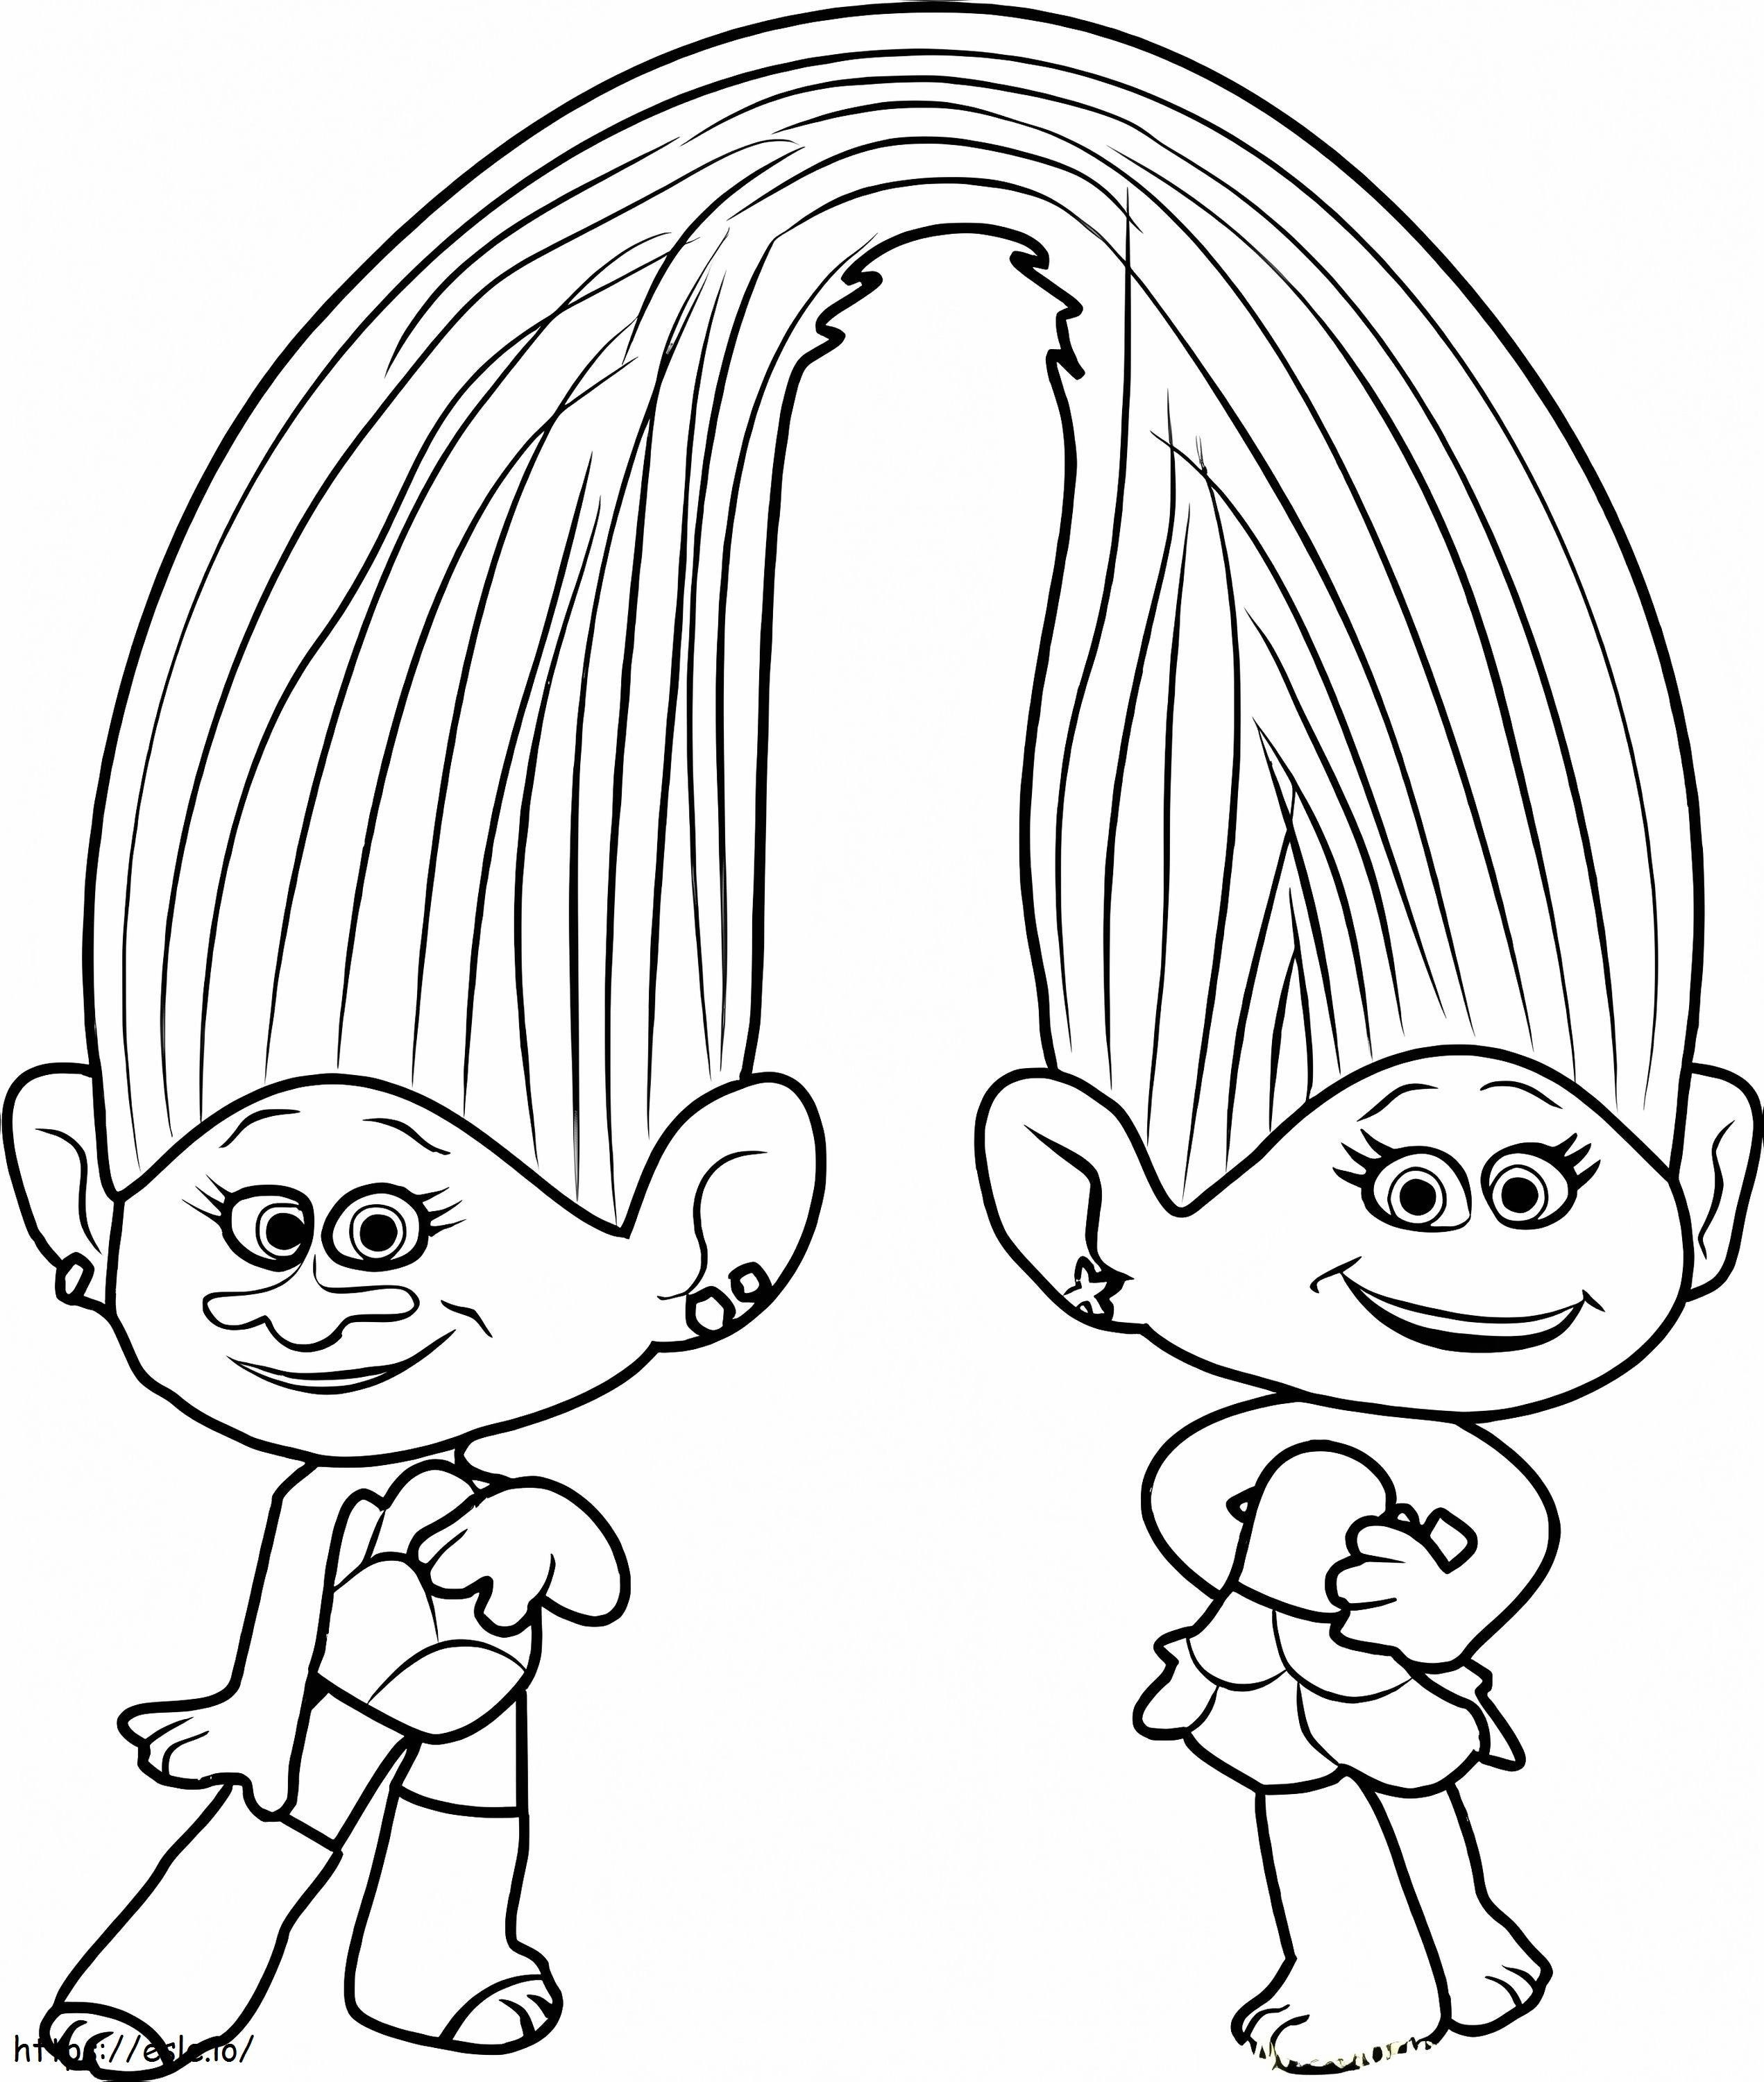 Trolls Satin And Chenille coloring page